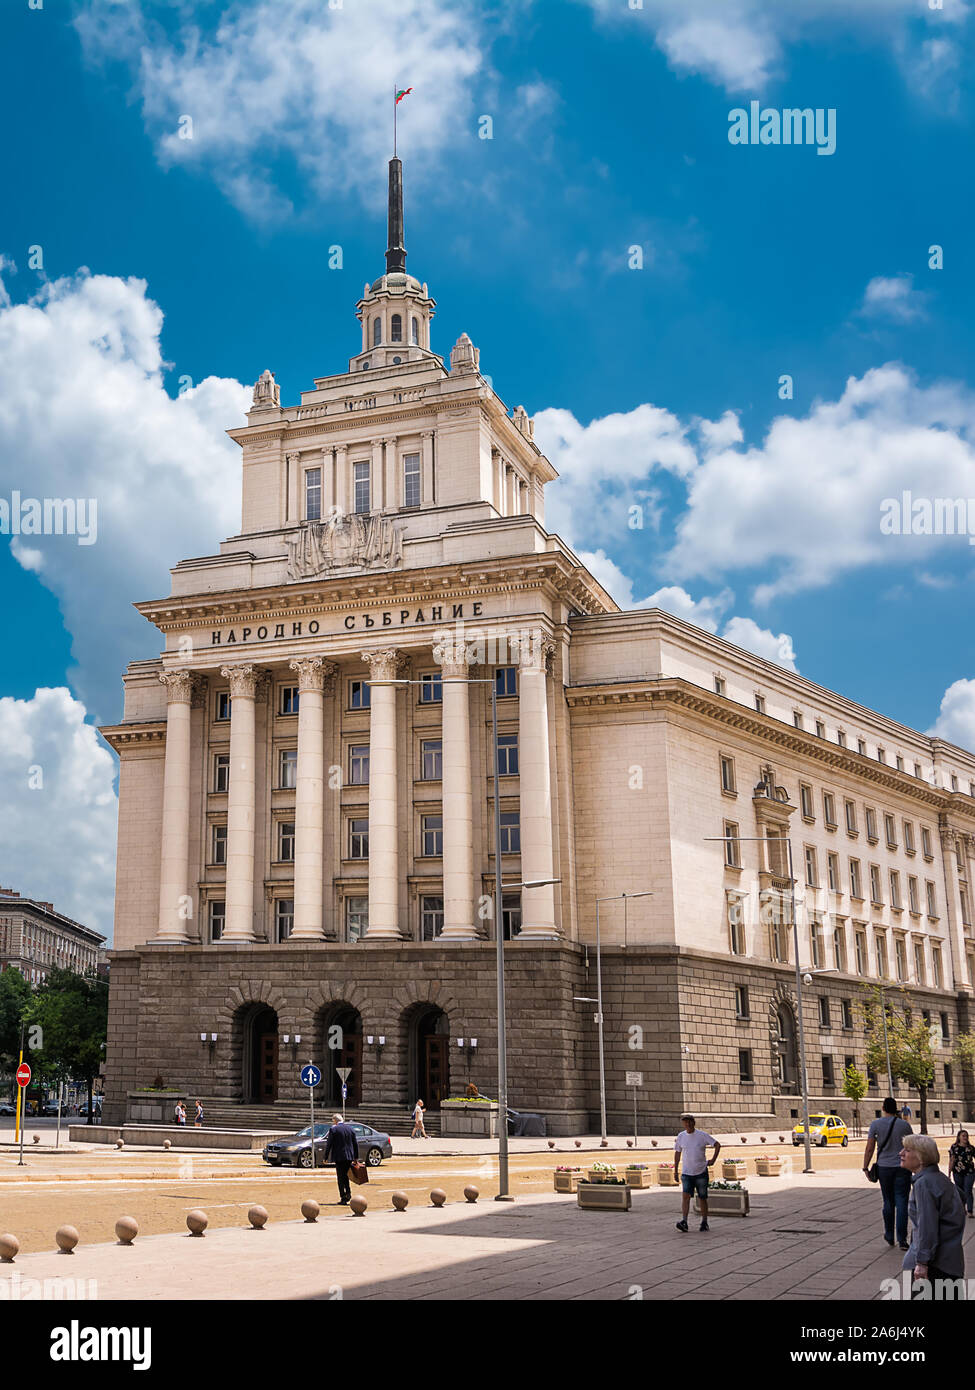 Sofia, Bulgaria - June 25, 2019: Palace of the Bulgarian National Assembly in Sofia on a normal day Stock Photo